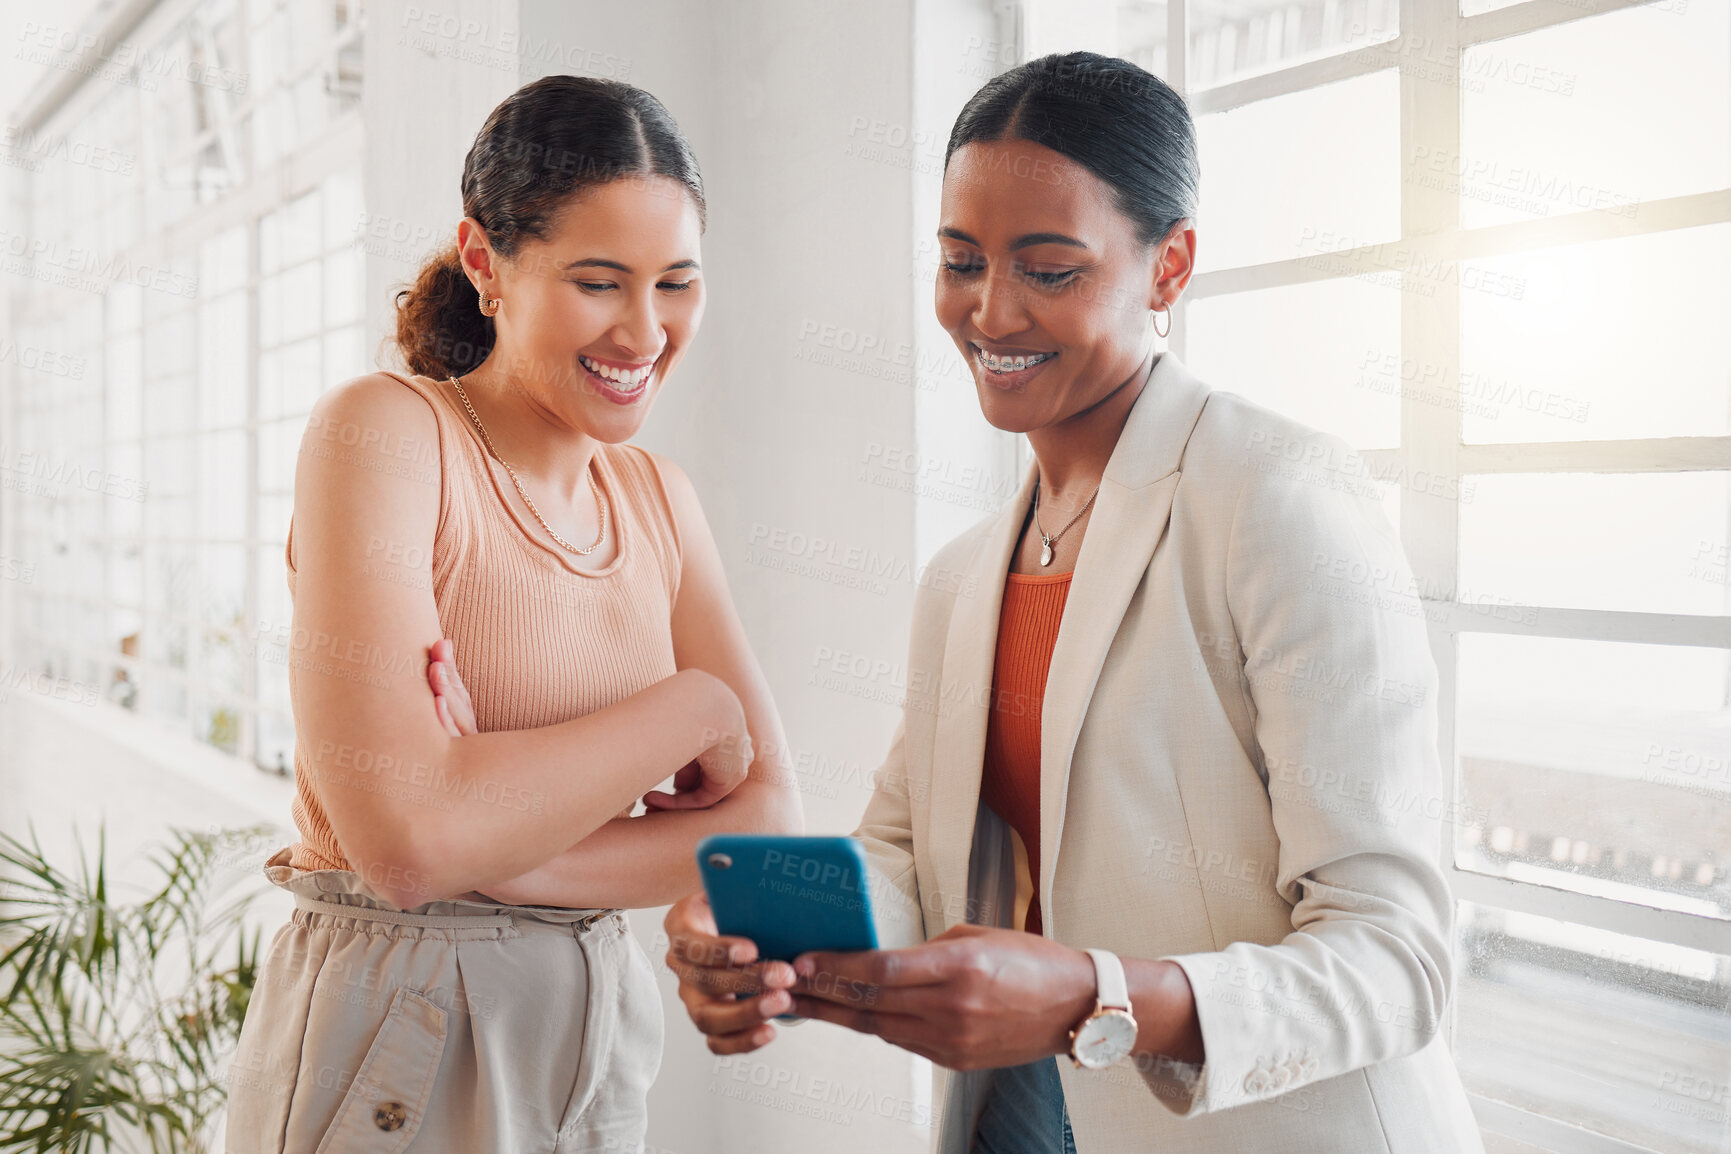 Buy stock photo Two young happy mixed race businesswomen using a phone together at work. Hispanic businesspeople talking using social media on a cellphone together in an office